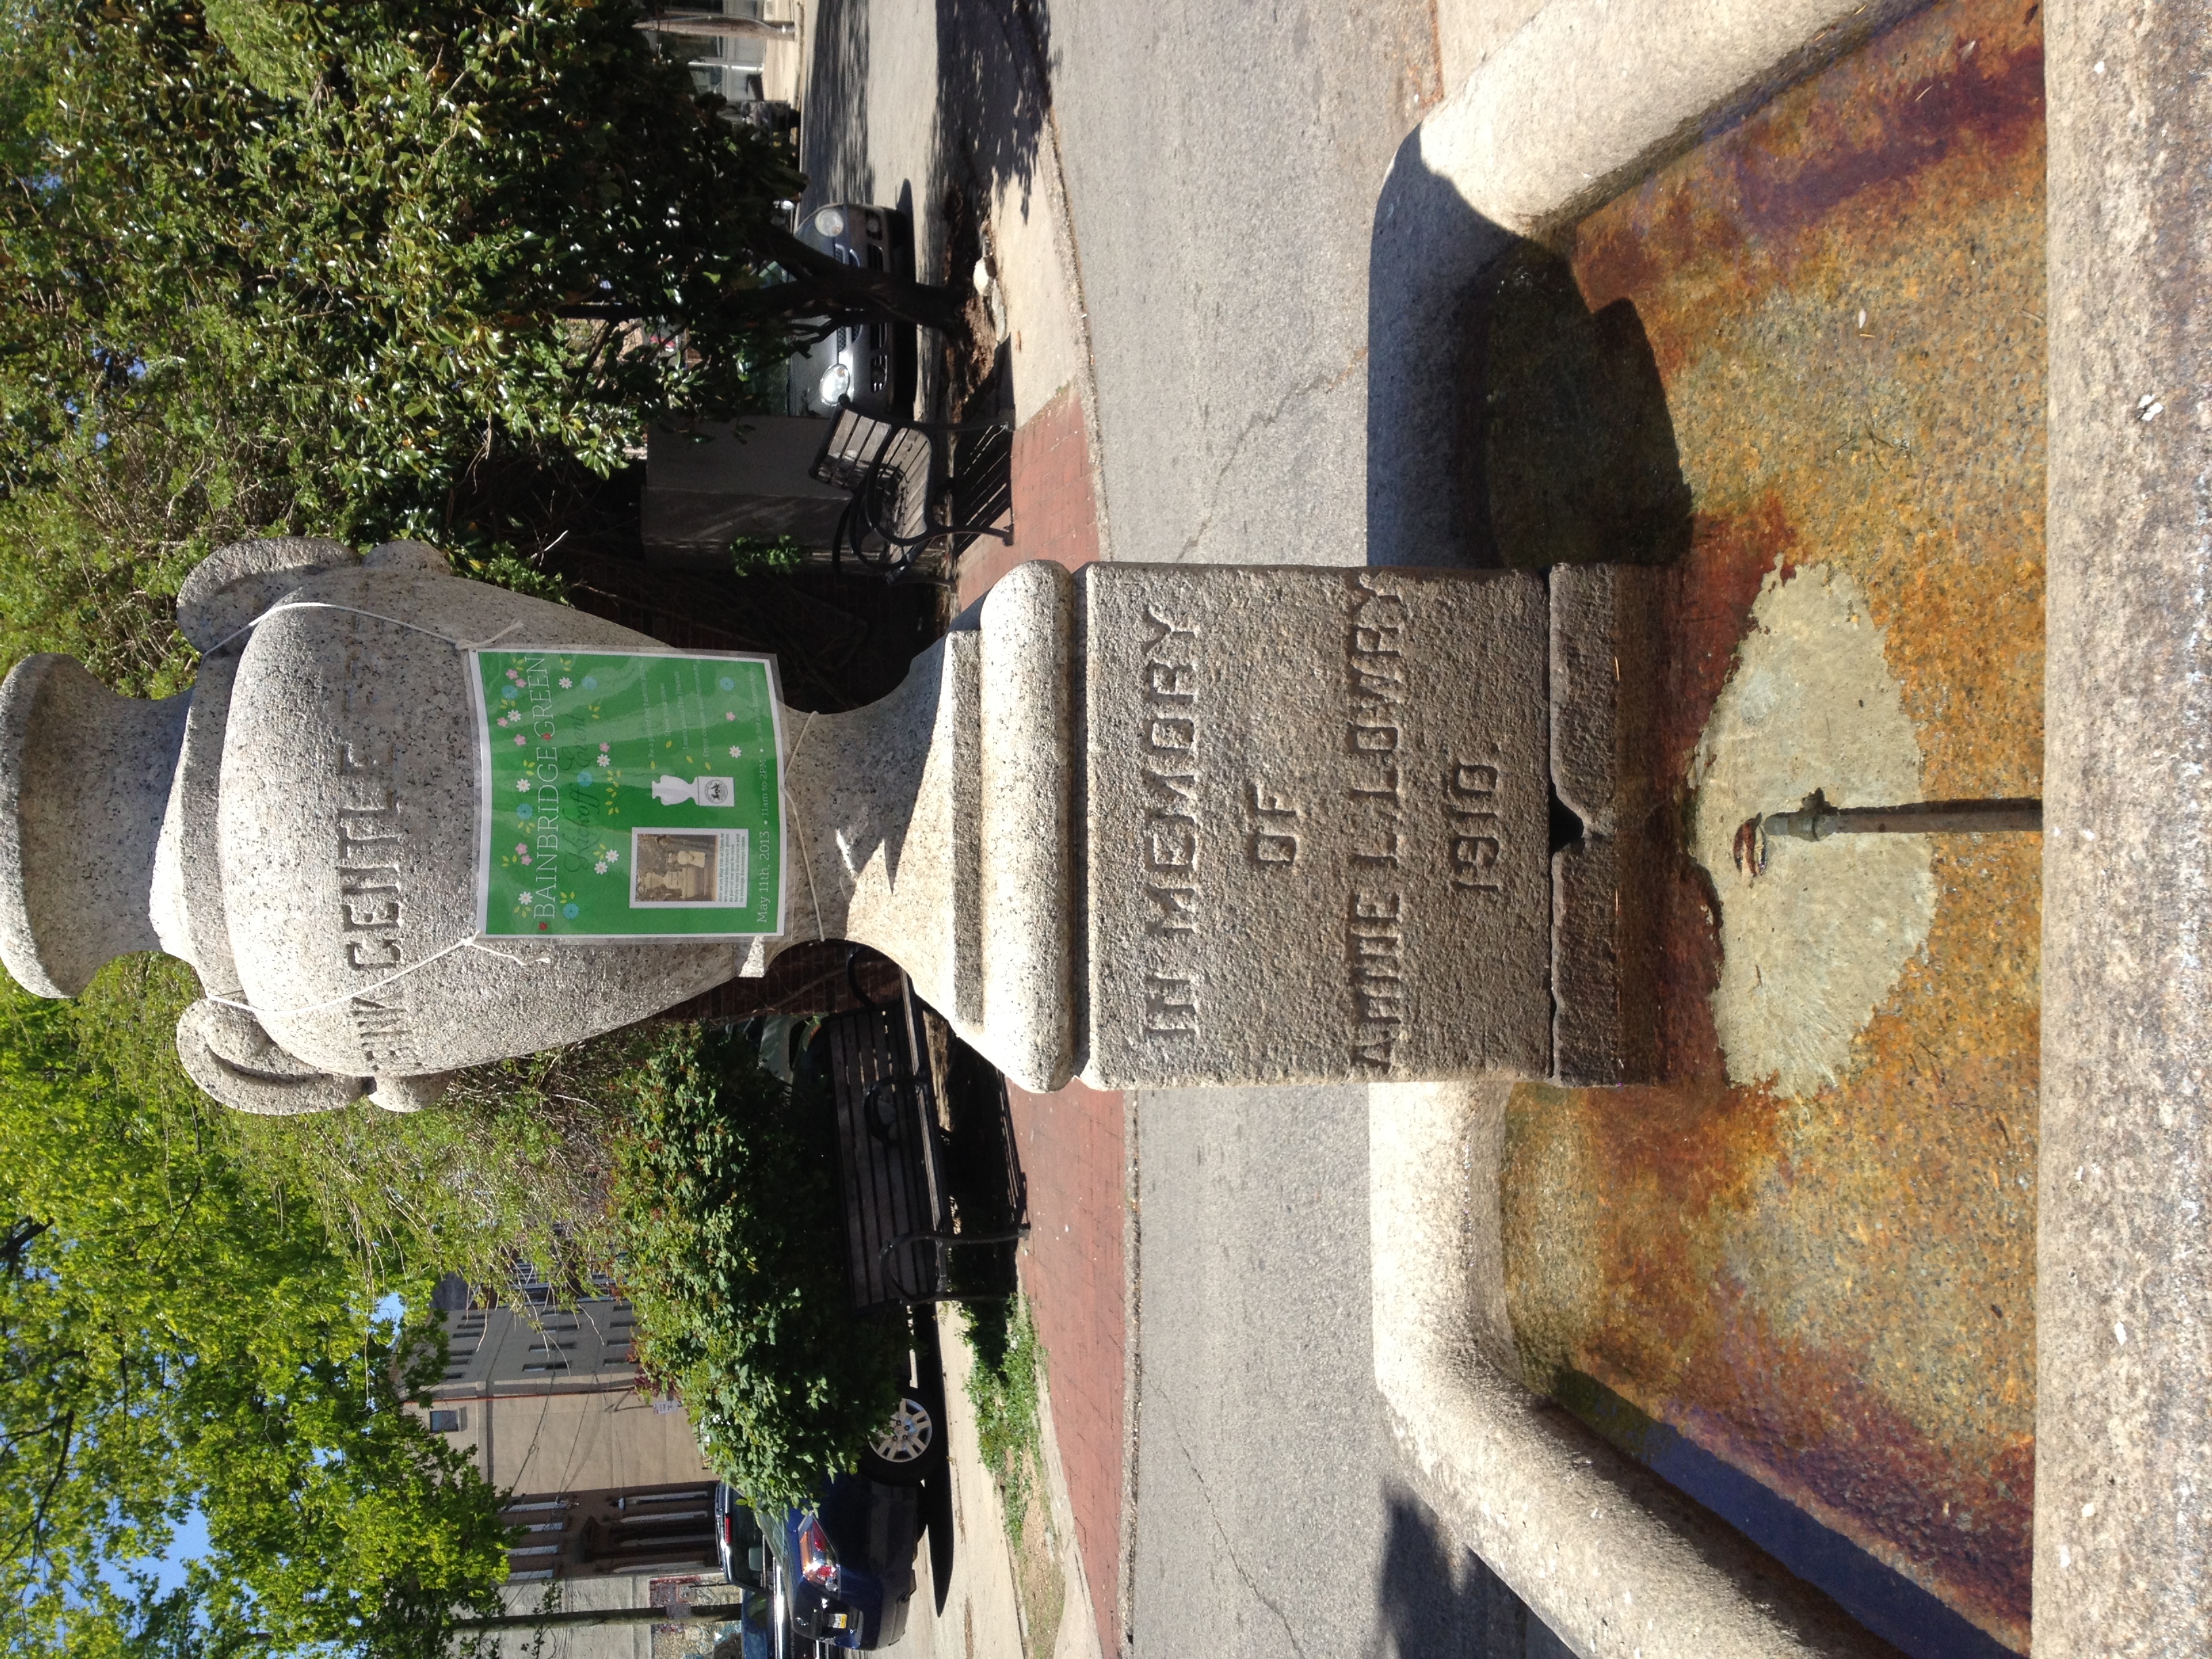 Drink Gentle Friends - This horse trough could anchor a redesigned plaza at the 3rd Street end of Bainbridge Green.